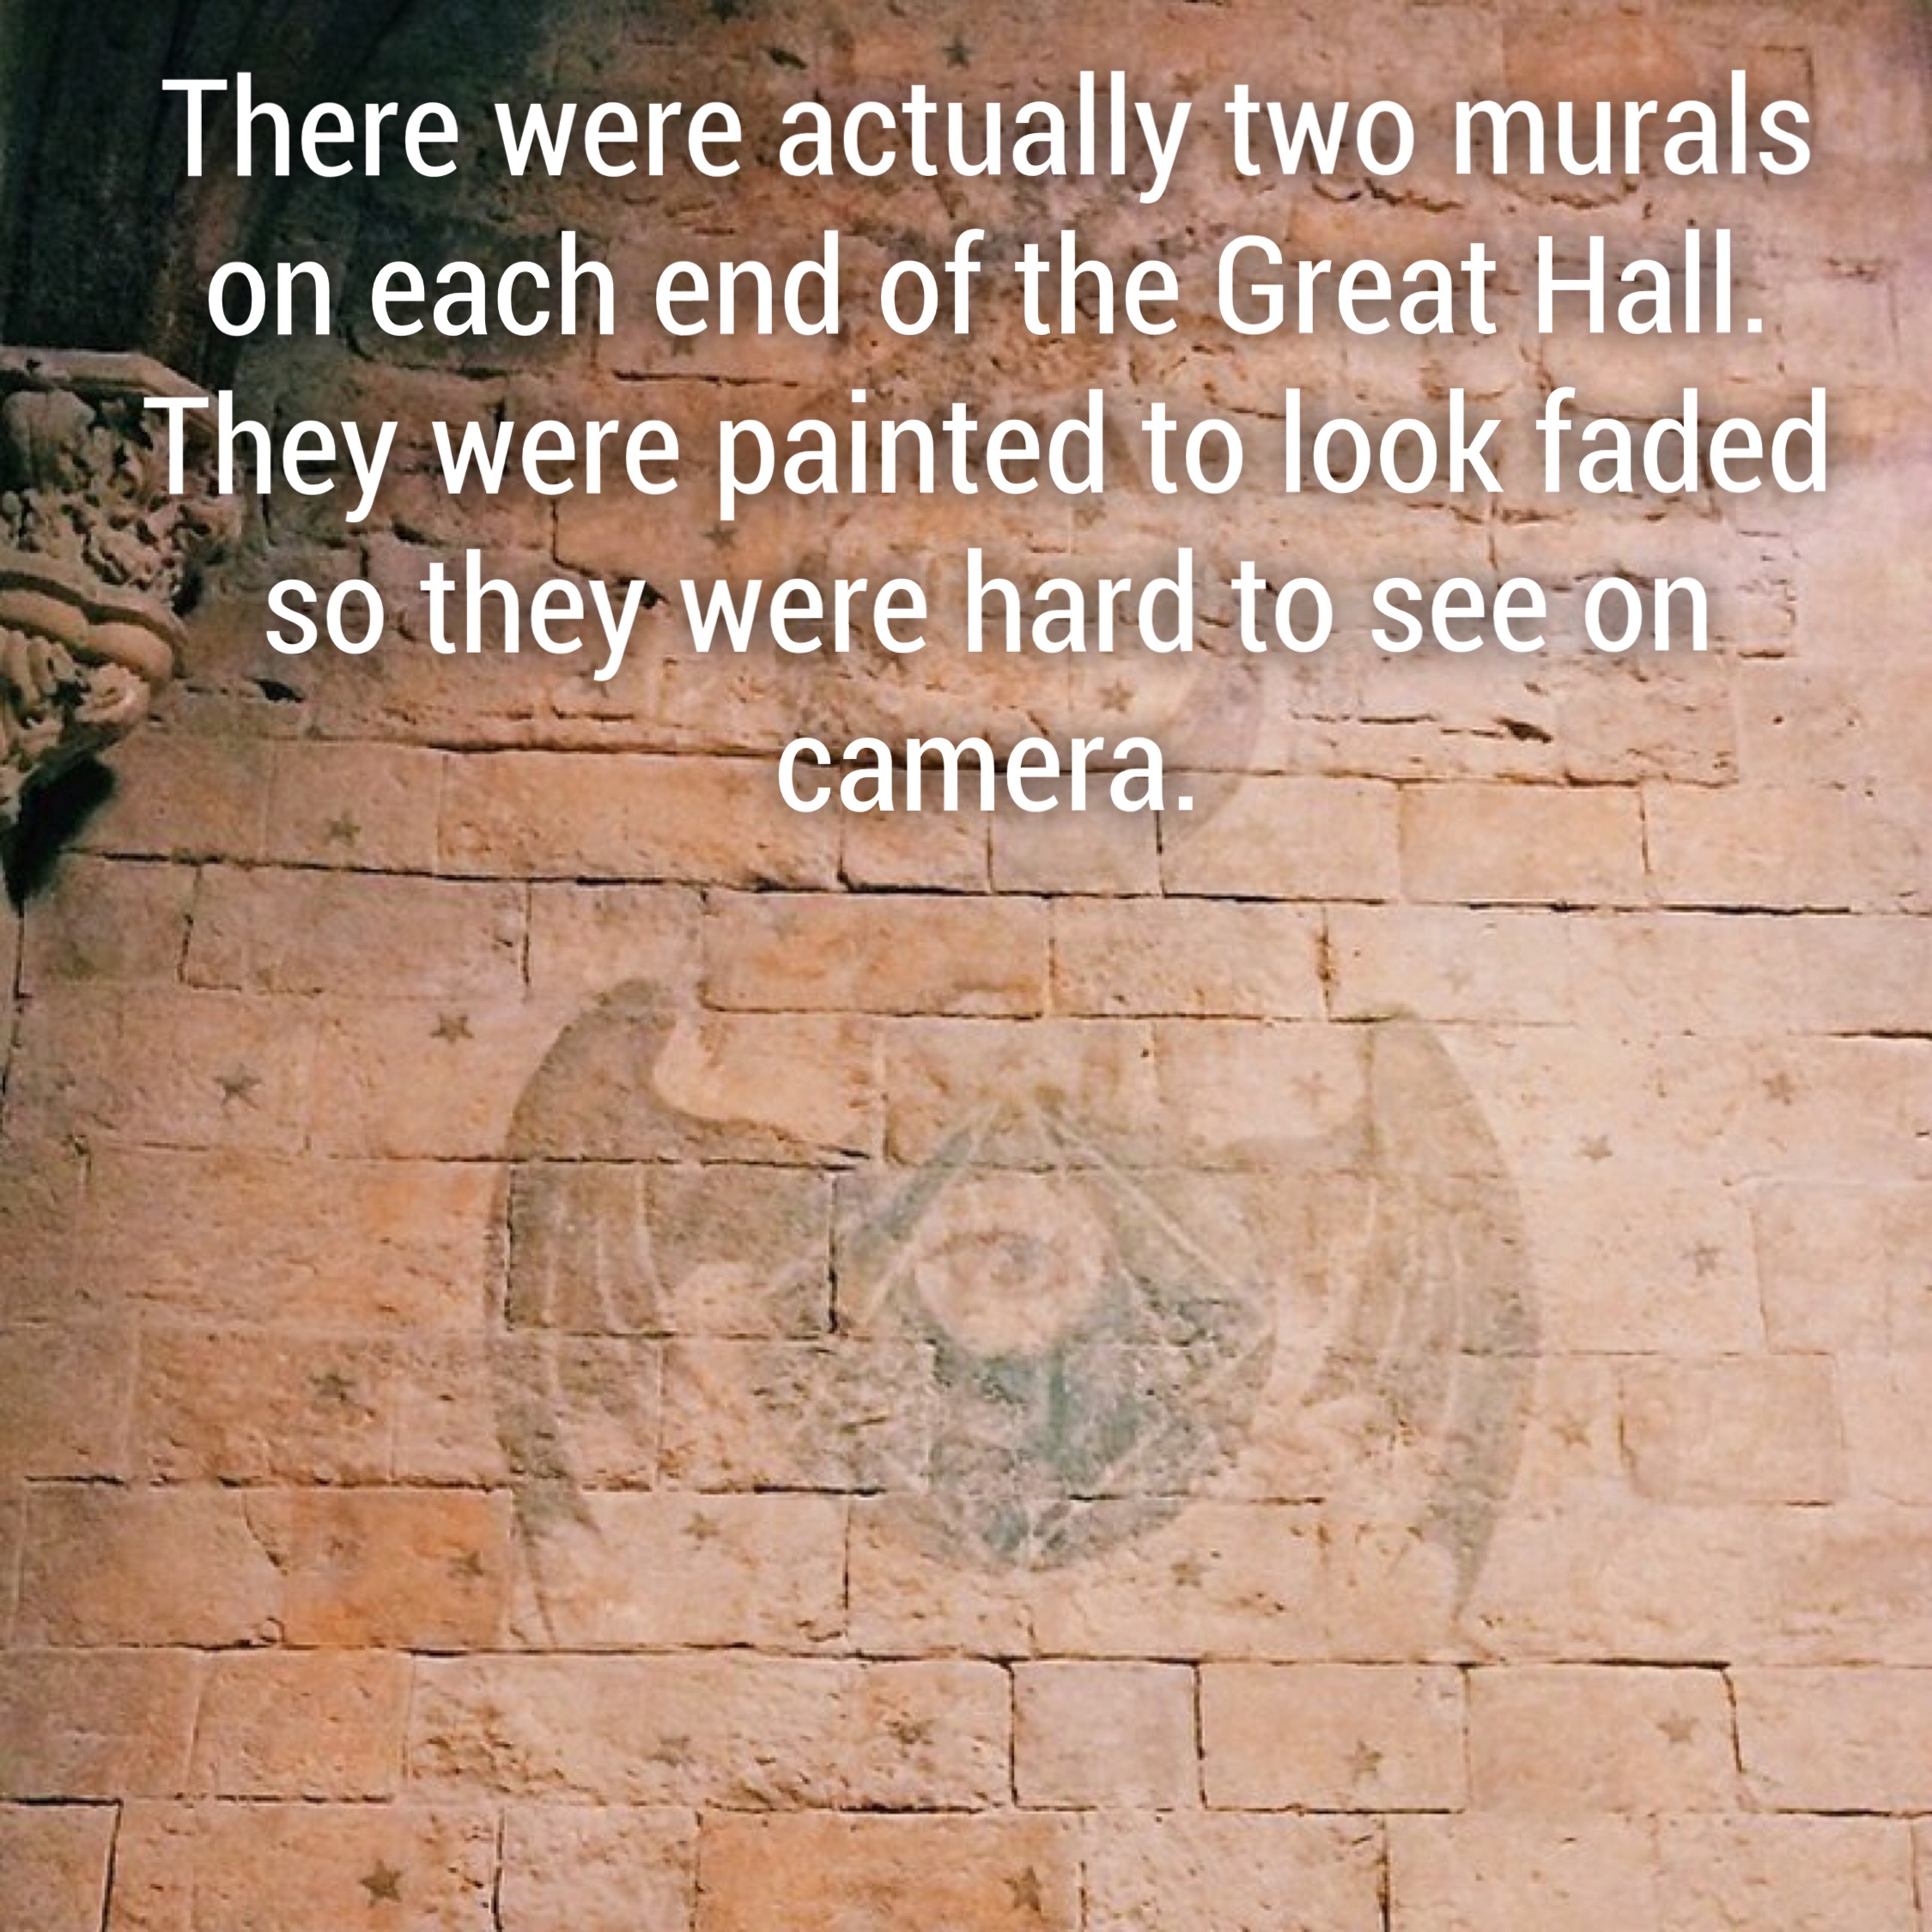 wall - There were actually two murals on each end of the Great Hall. They were painted to look faded so they were hard to see on camera.